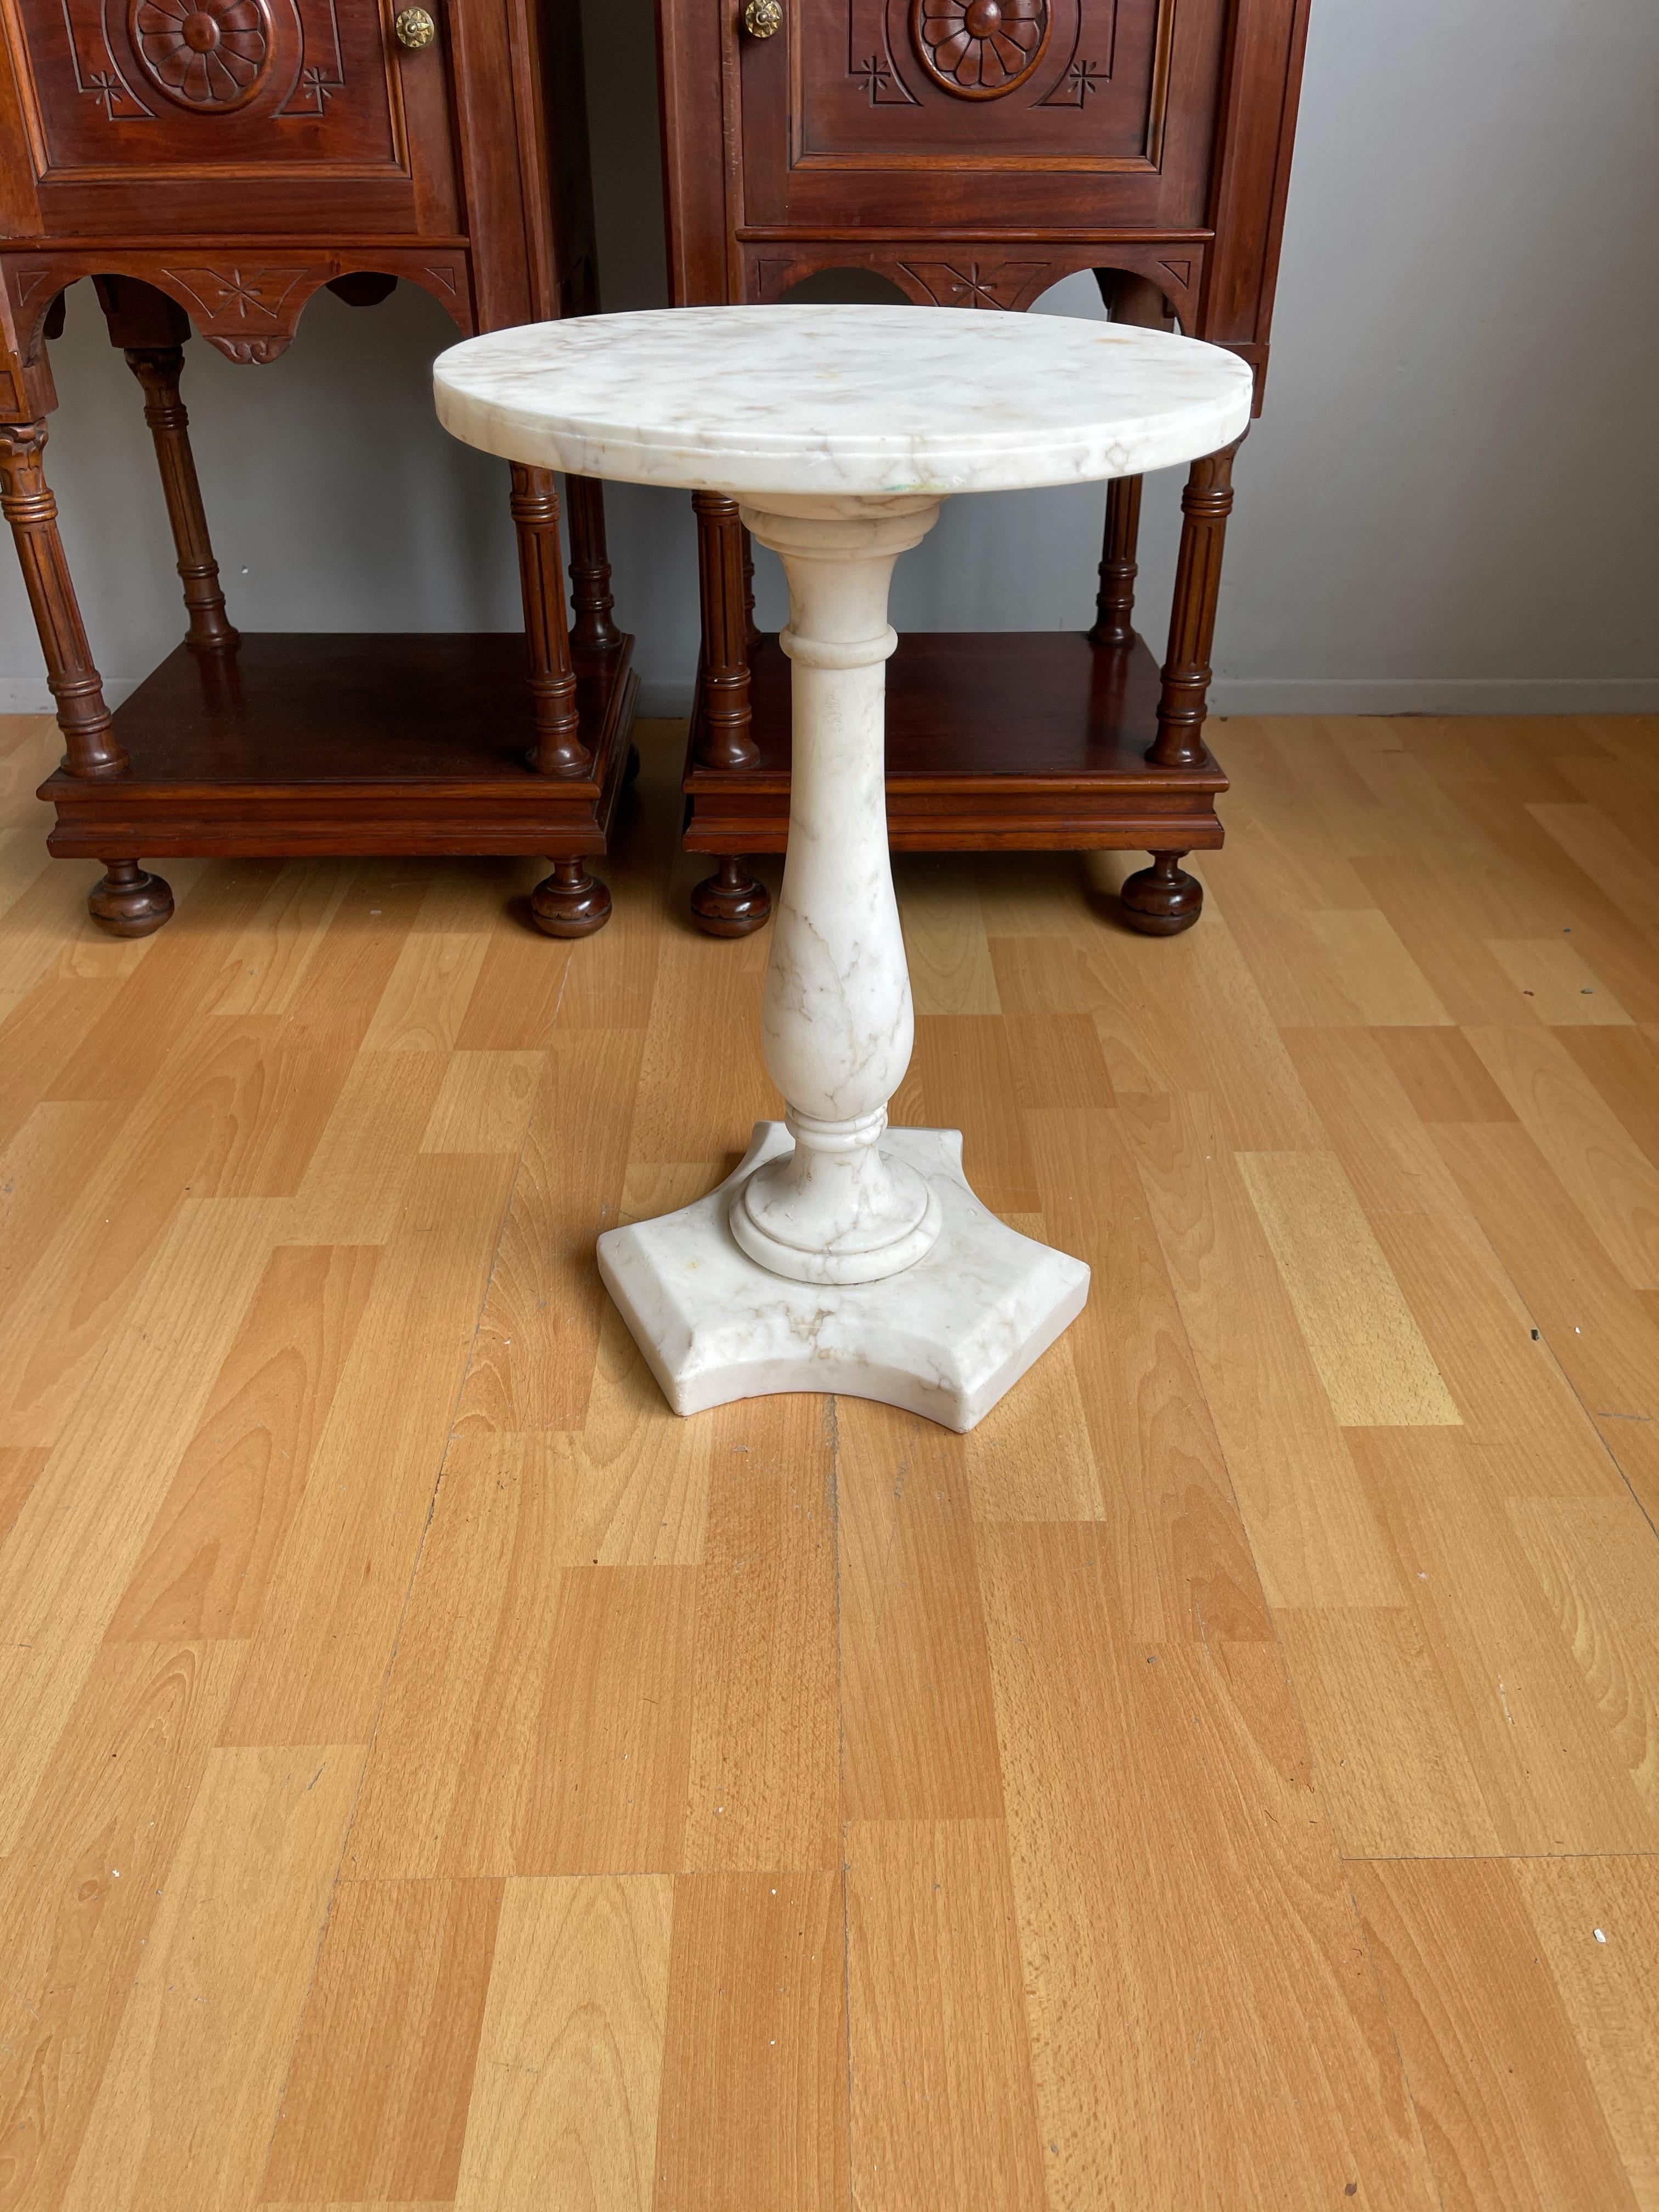 20th Century Italian Design Midcentury Modern White Carrara Marble Pedestal Stand / End Table For Sale